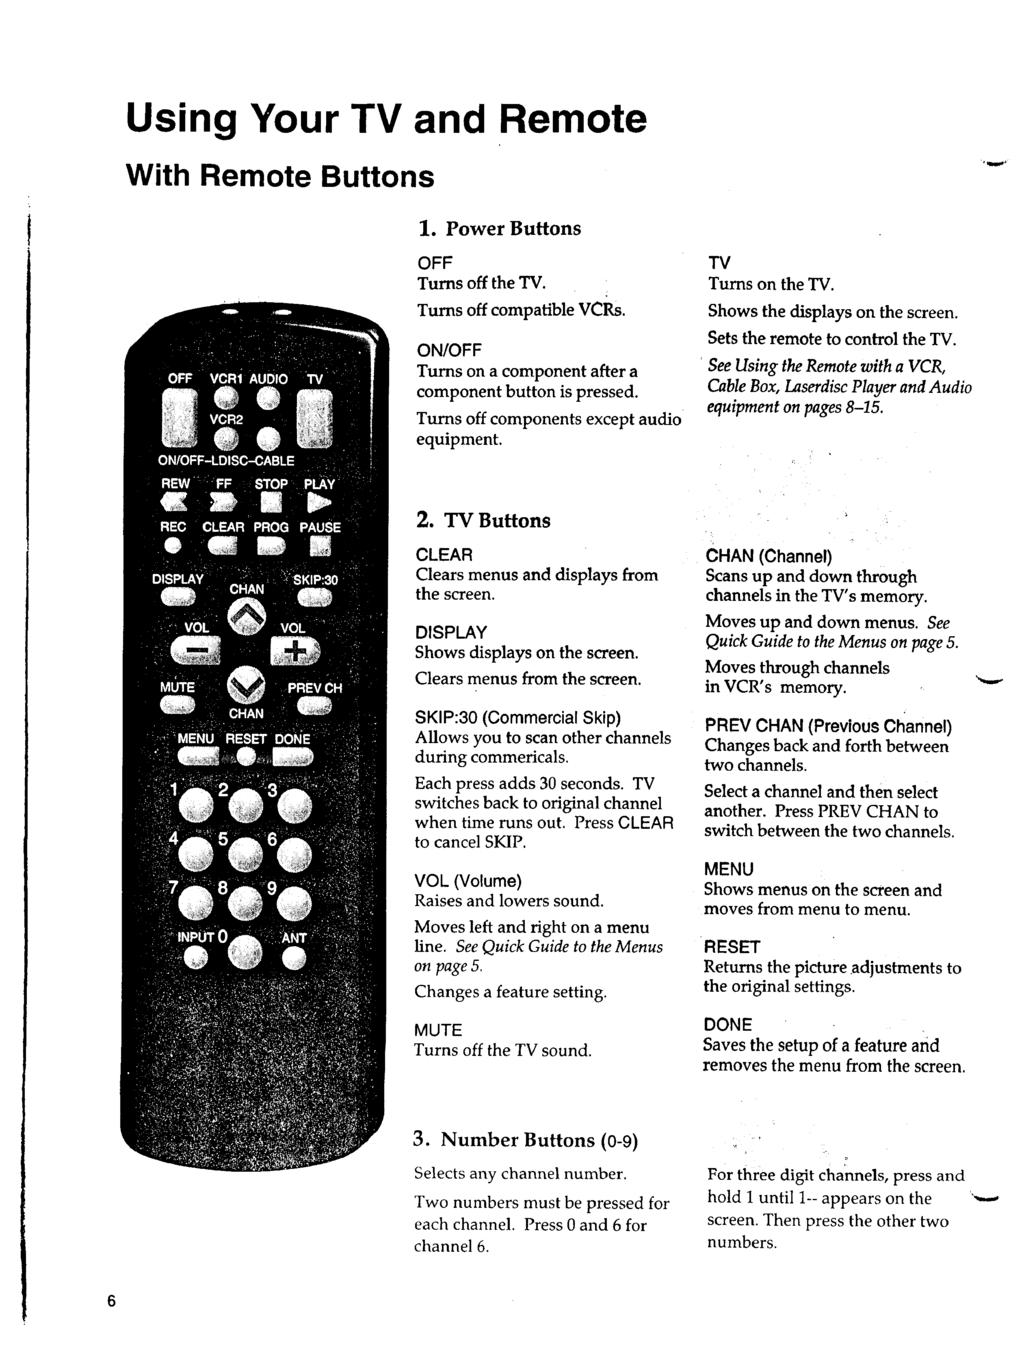 Using Your TV and Remote With Remote Buttons 1. Power Buttons OFF Turns off the TV. Turns off compatible ON/OFF VCRs. Turns on a component after a component button is pressed.